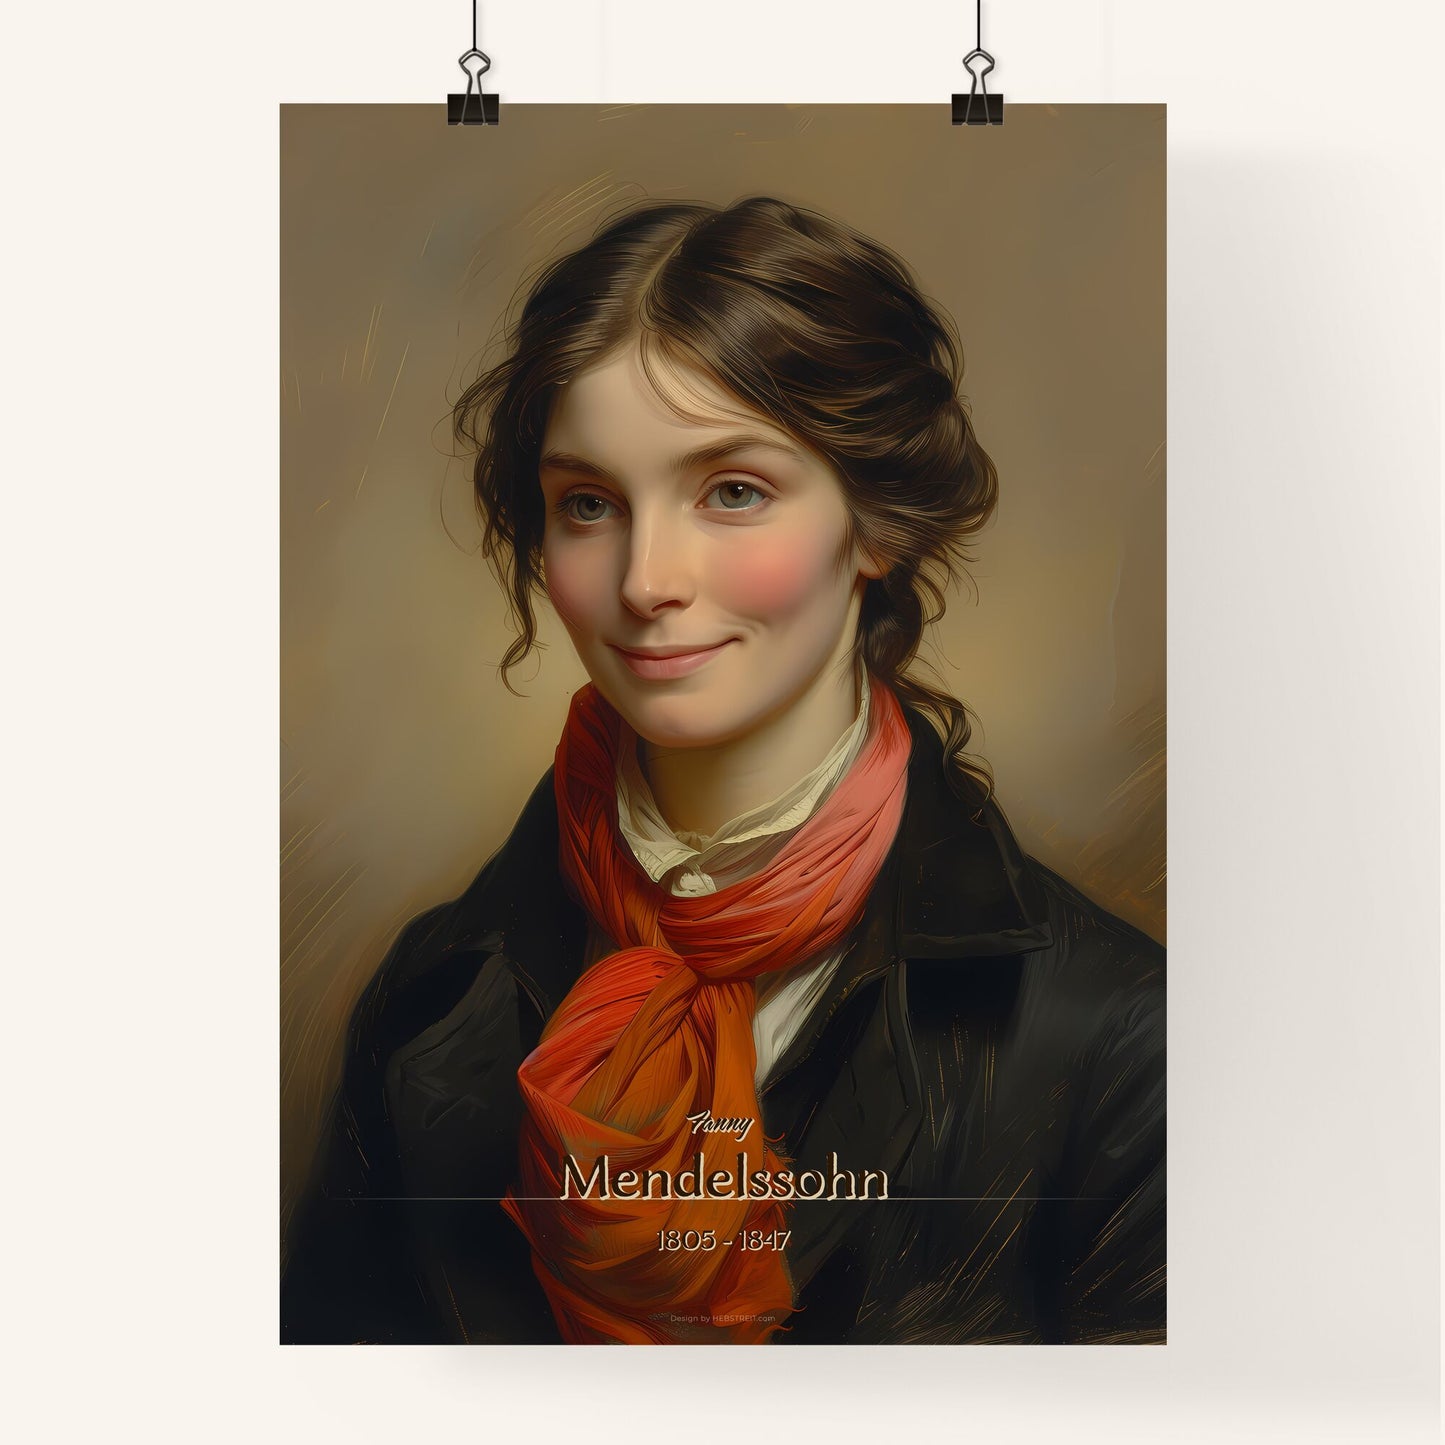 Fanny, Mendelssohn, 1805 - 1847, A Poster of a woman with a red scarf Default Title